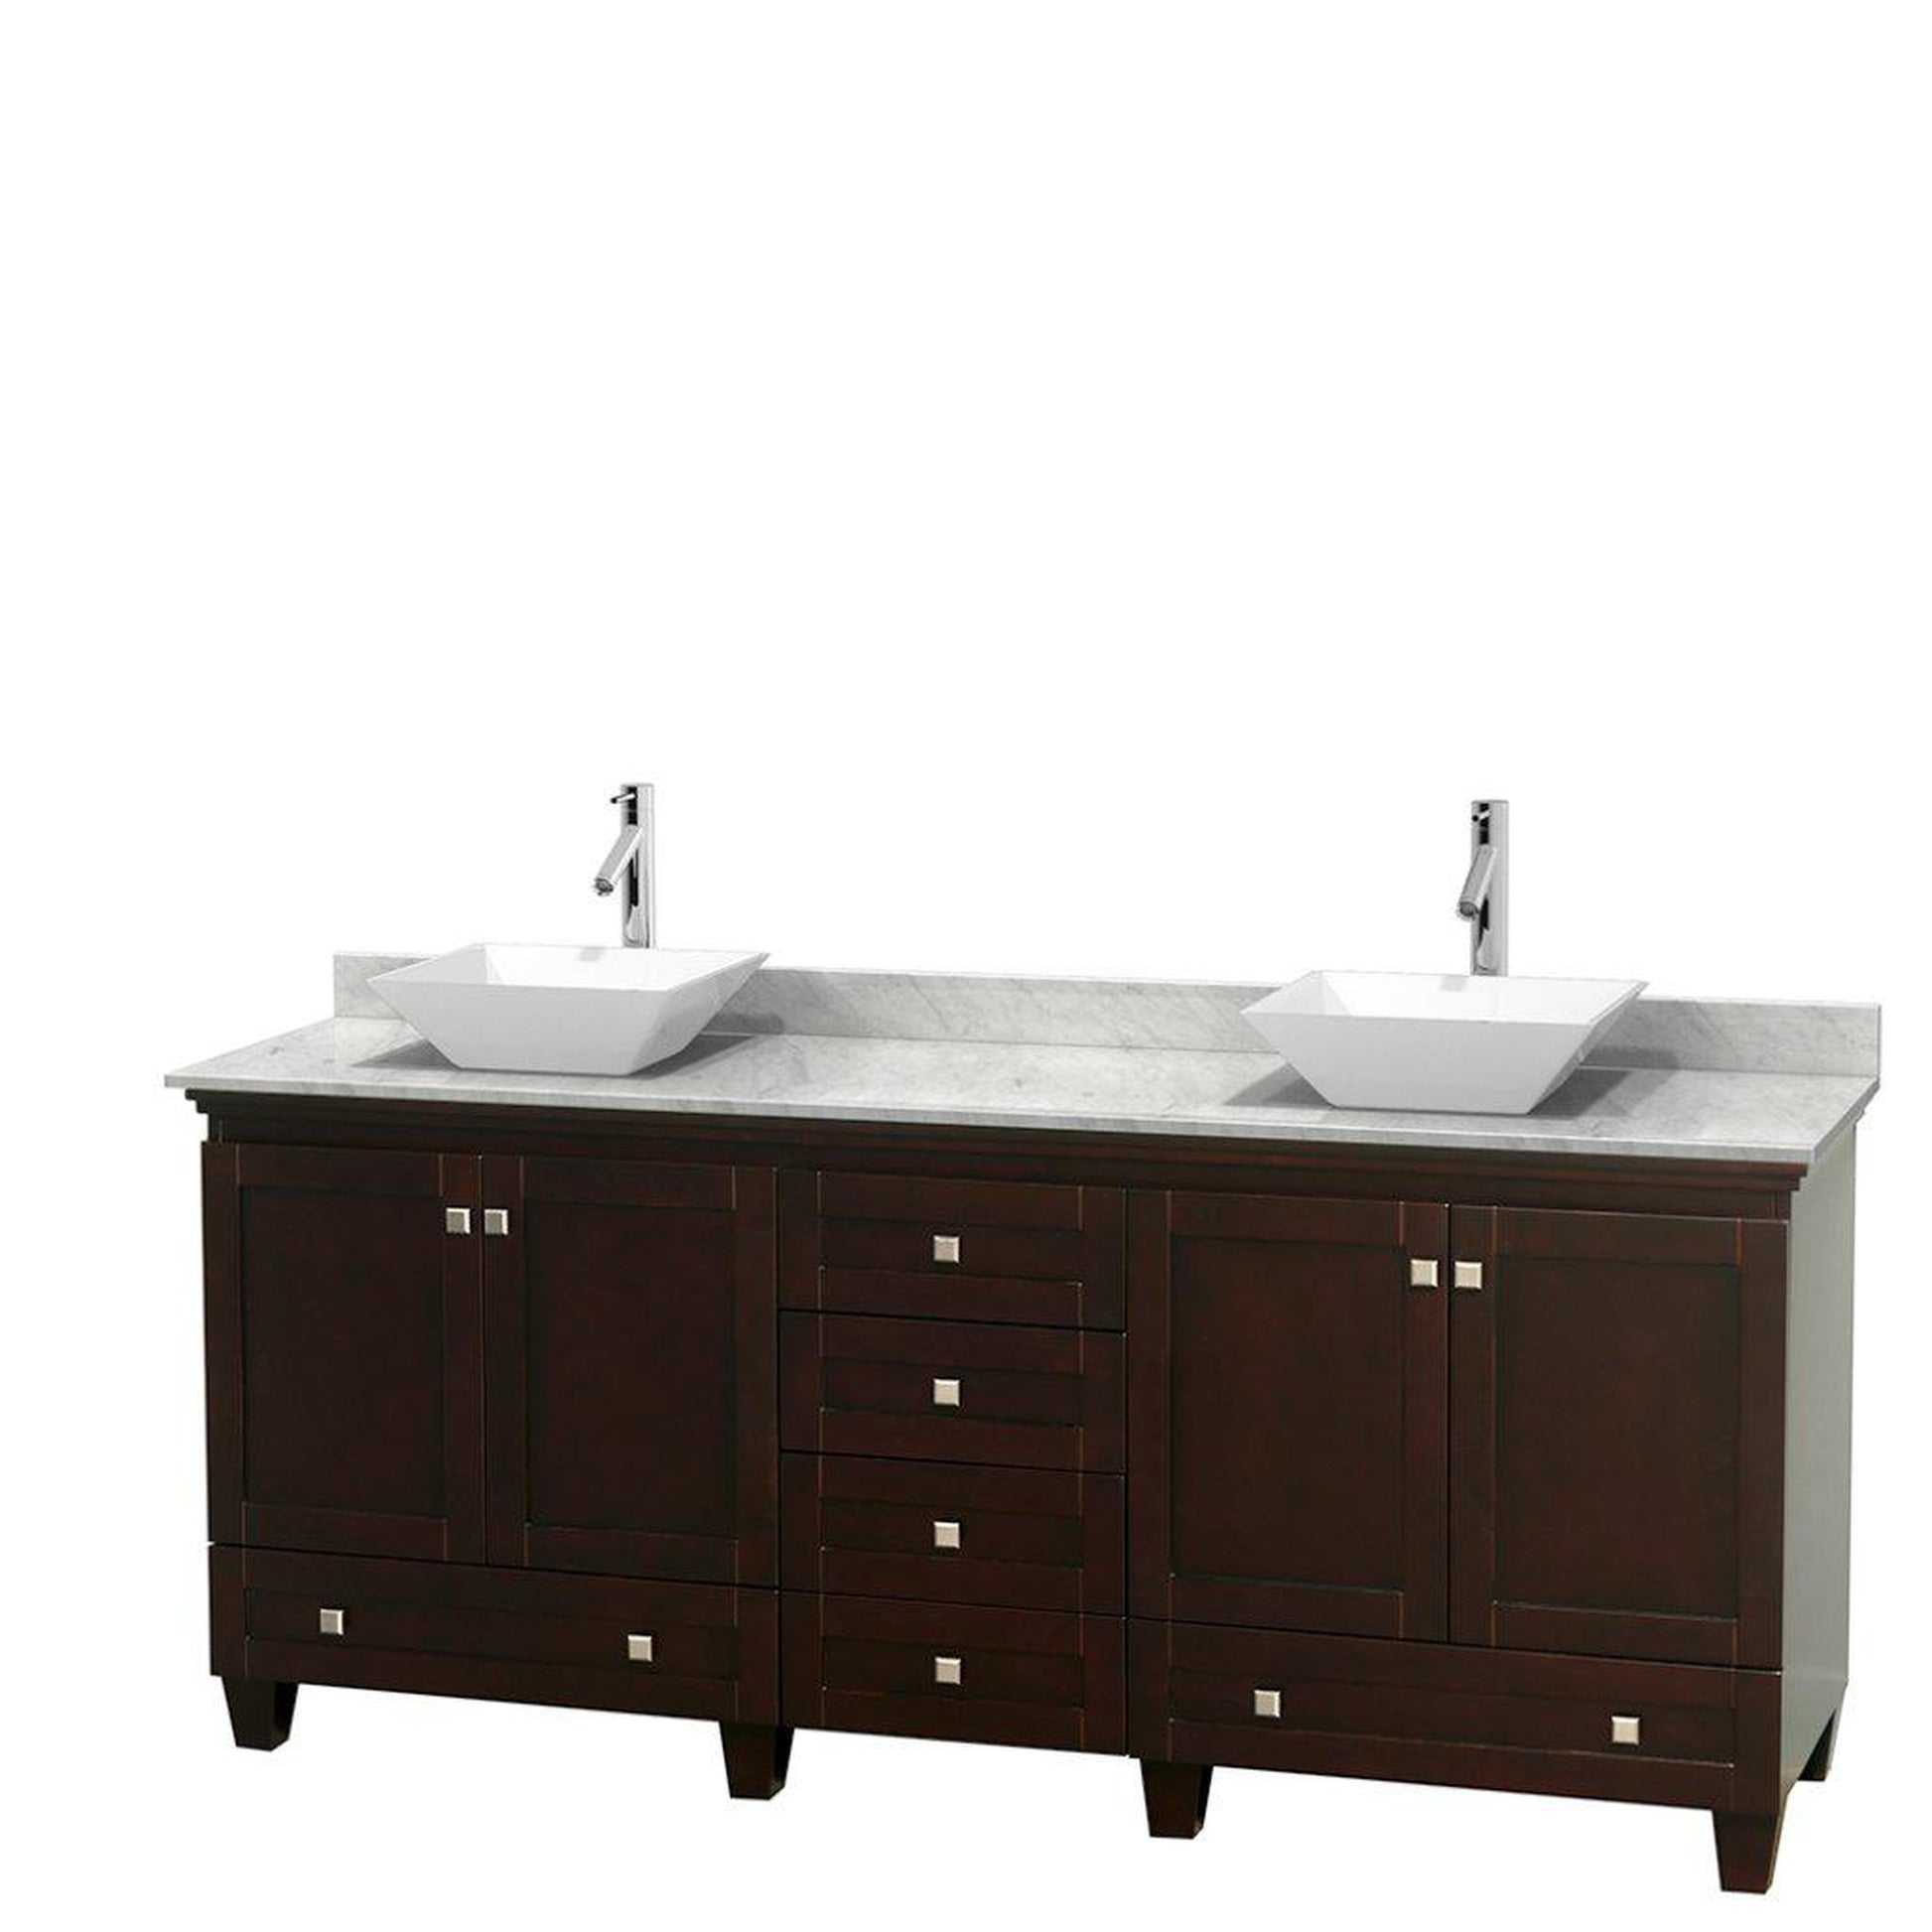 Wyndham Collection Acclaim 80" Double Bathroom Espresso Vanity With White Carrara Marble Countertop And Pyra White Porcelain Sinks